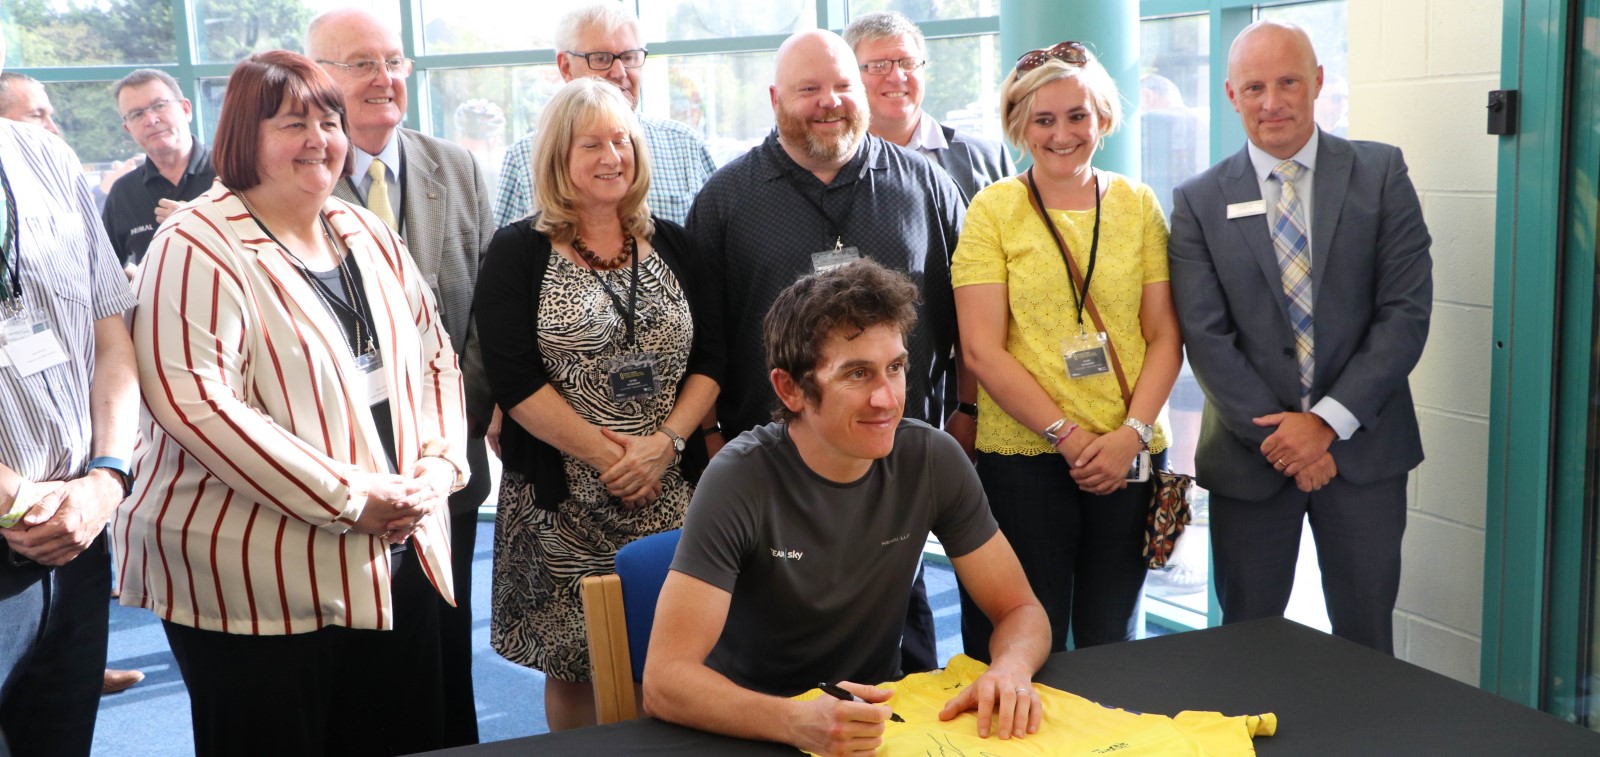 Cyclist Geraint Thomas sat a table with a line of people behind him